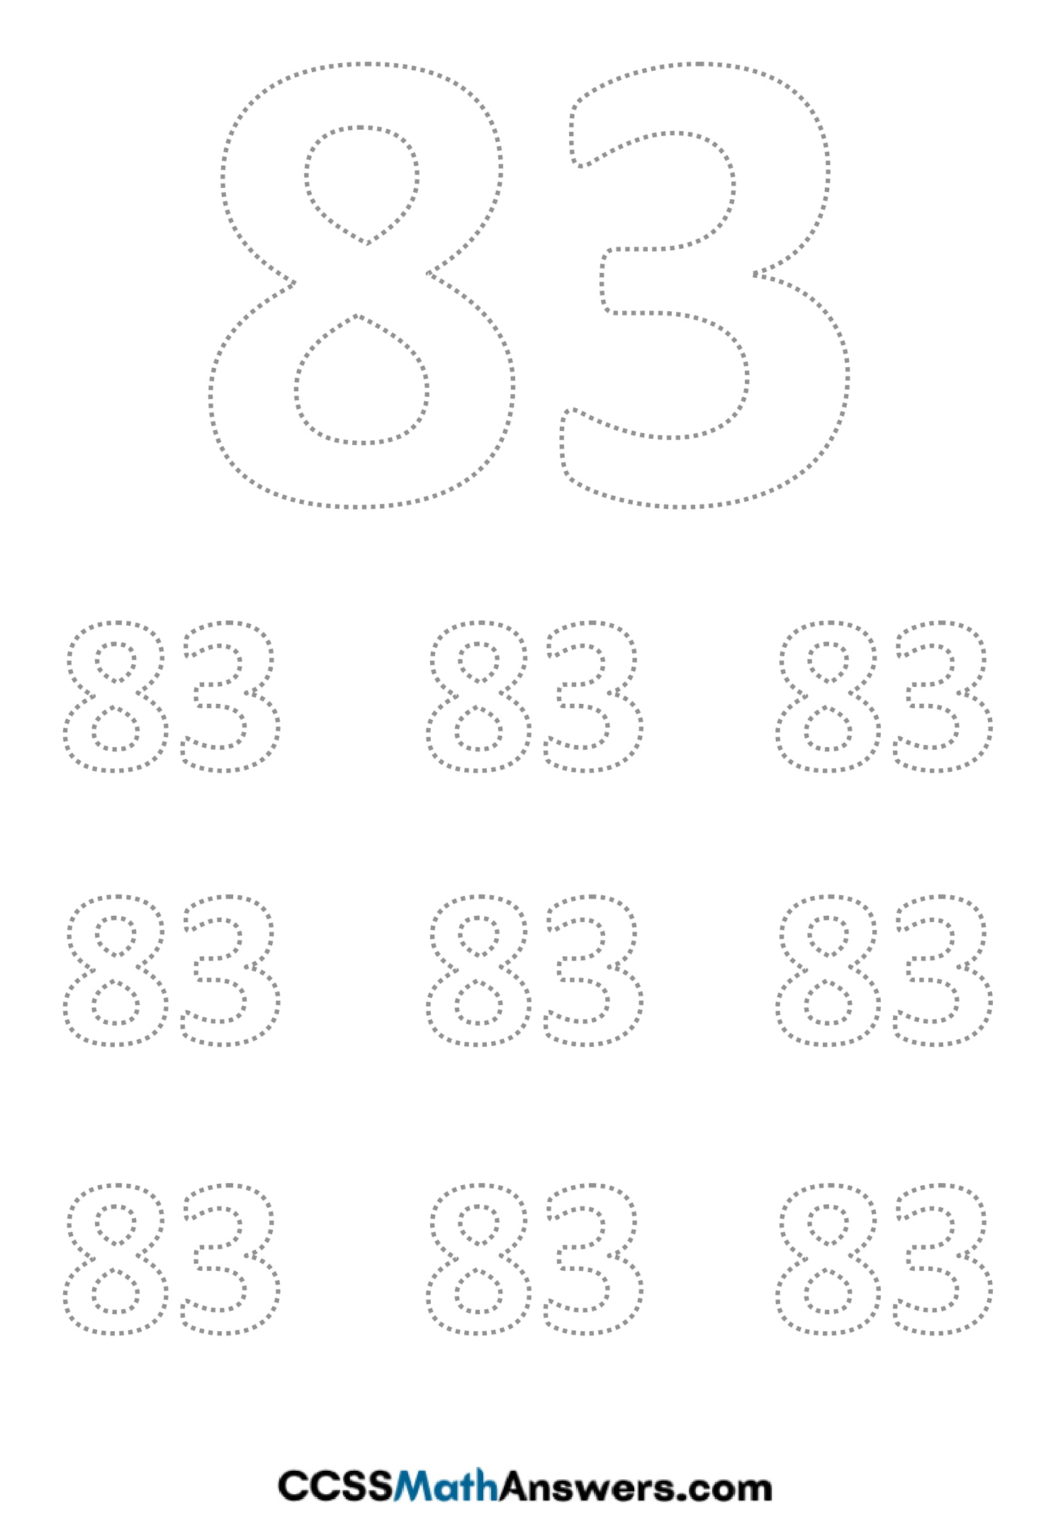 Worksheet On Number 83 Number 83 Recognition Tracing Handwriting Practice Activities